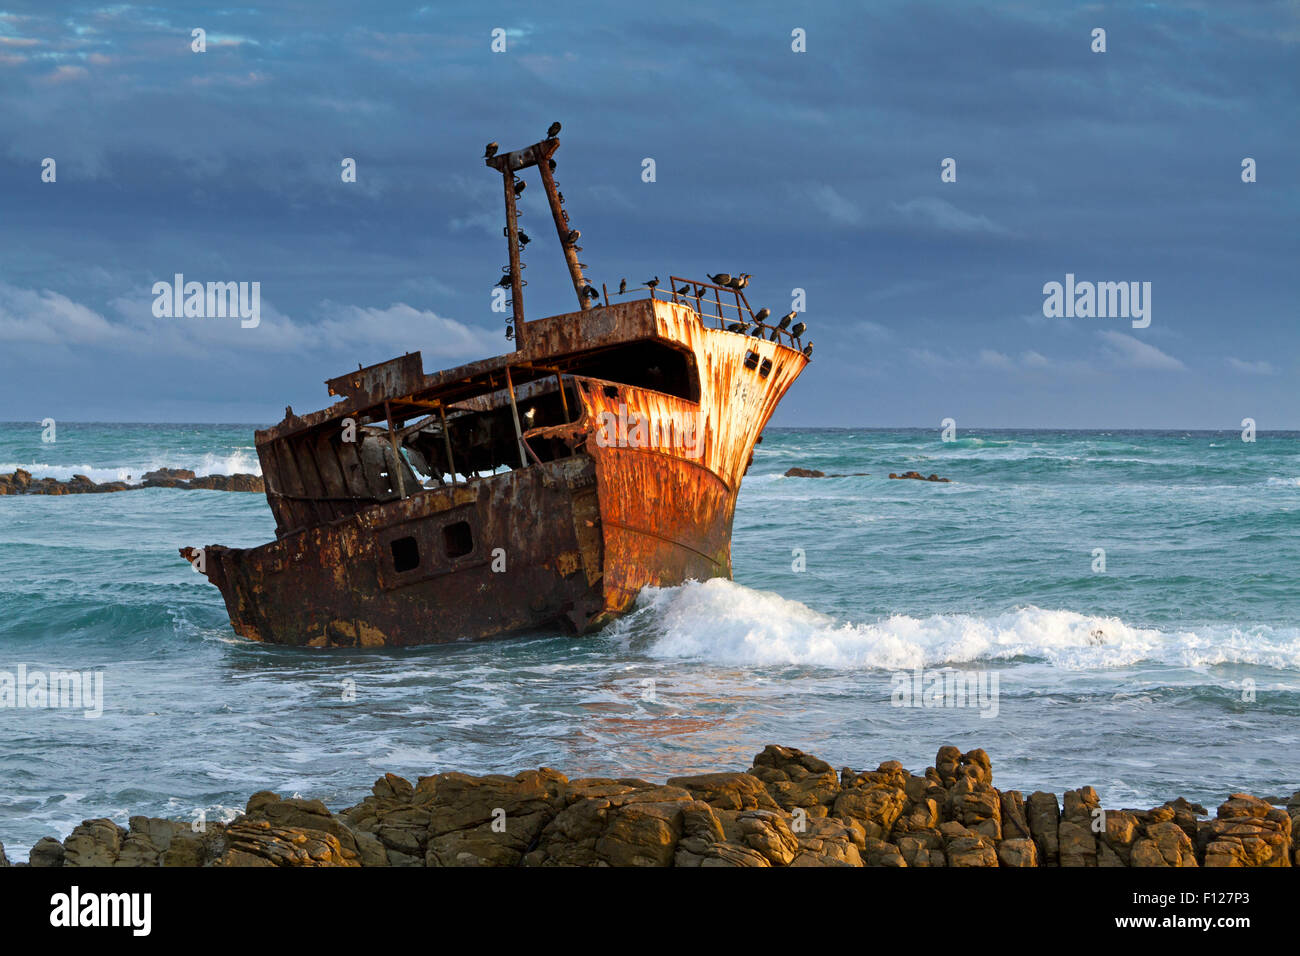 The Meisho Maru No 38 shipwreck at Cape Agulhus, Western Cape, South Africa Stock Photo